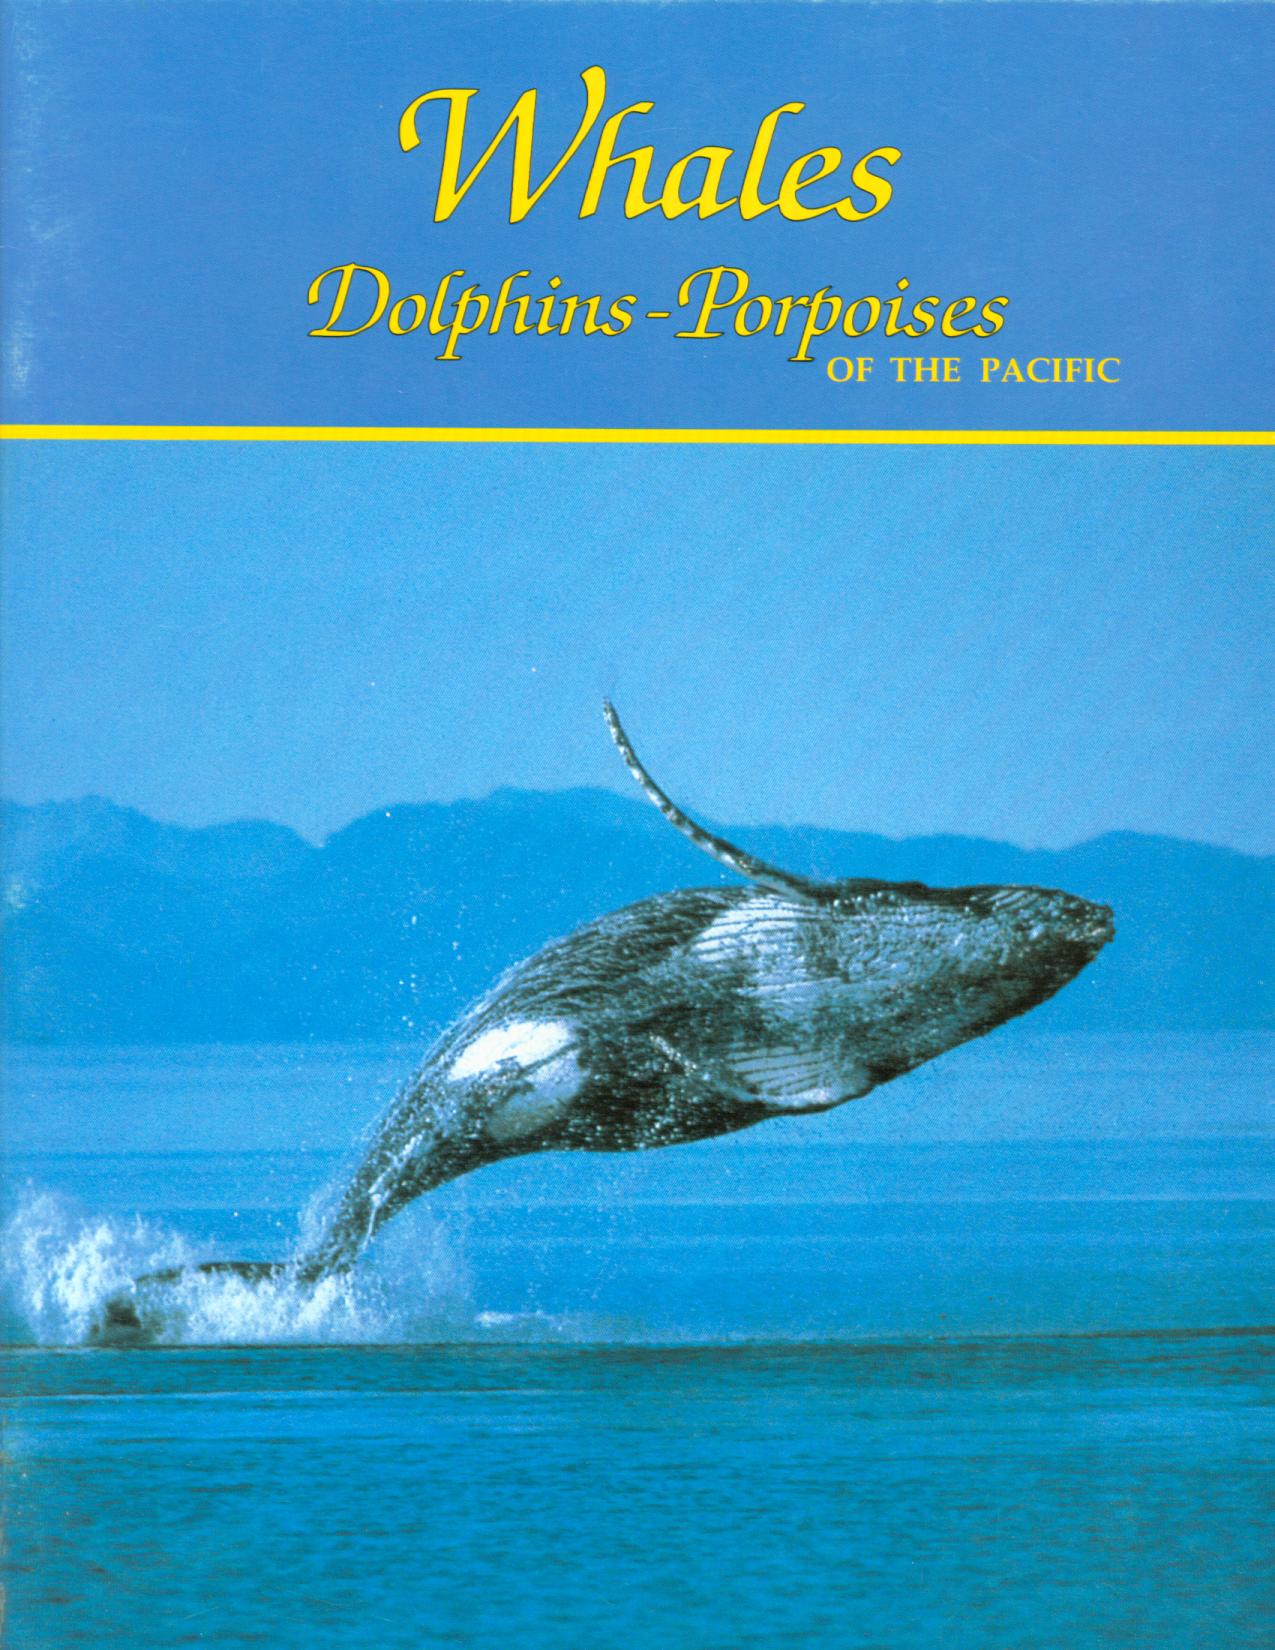 WHALES DOLPHINS-PORPOISES OF THE PACIFIC: shorelines of America series.